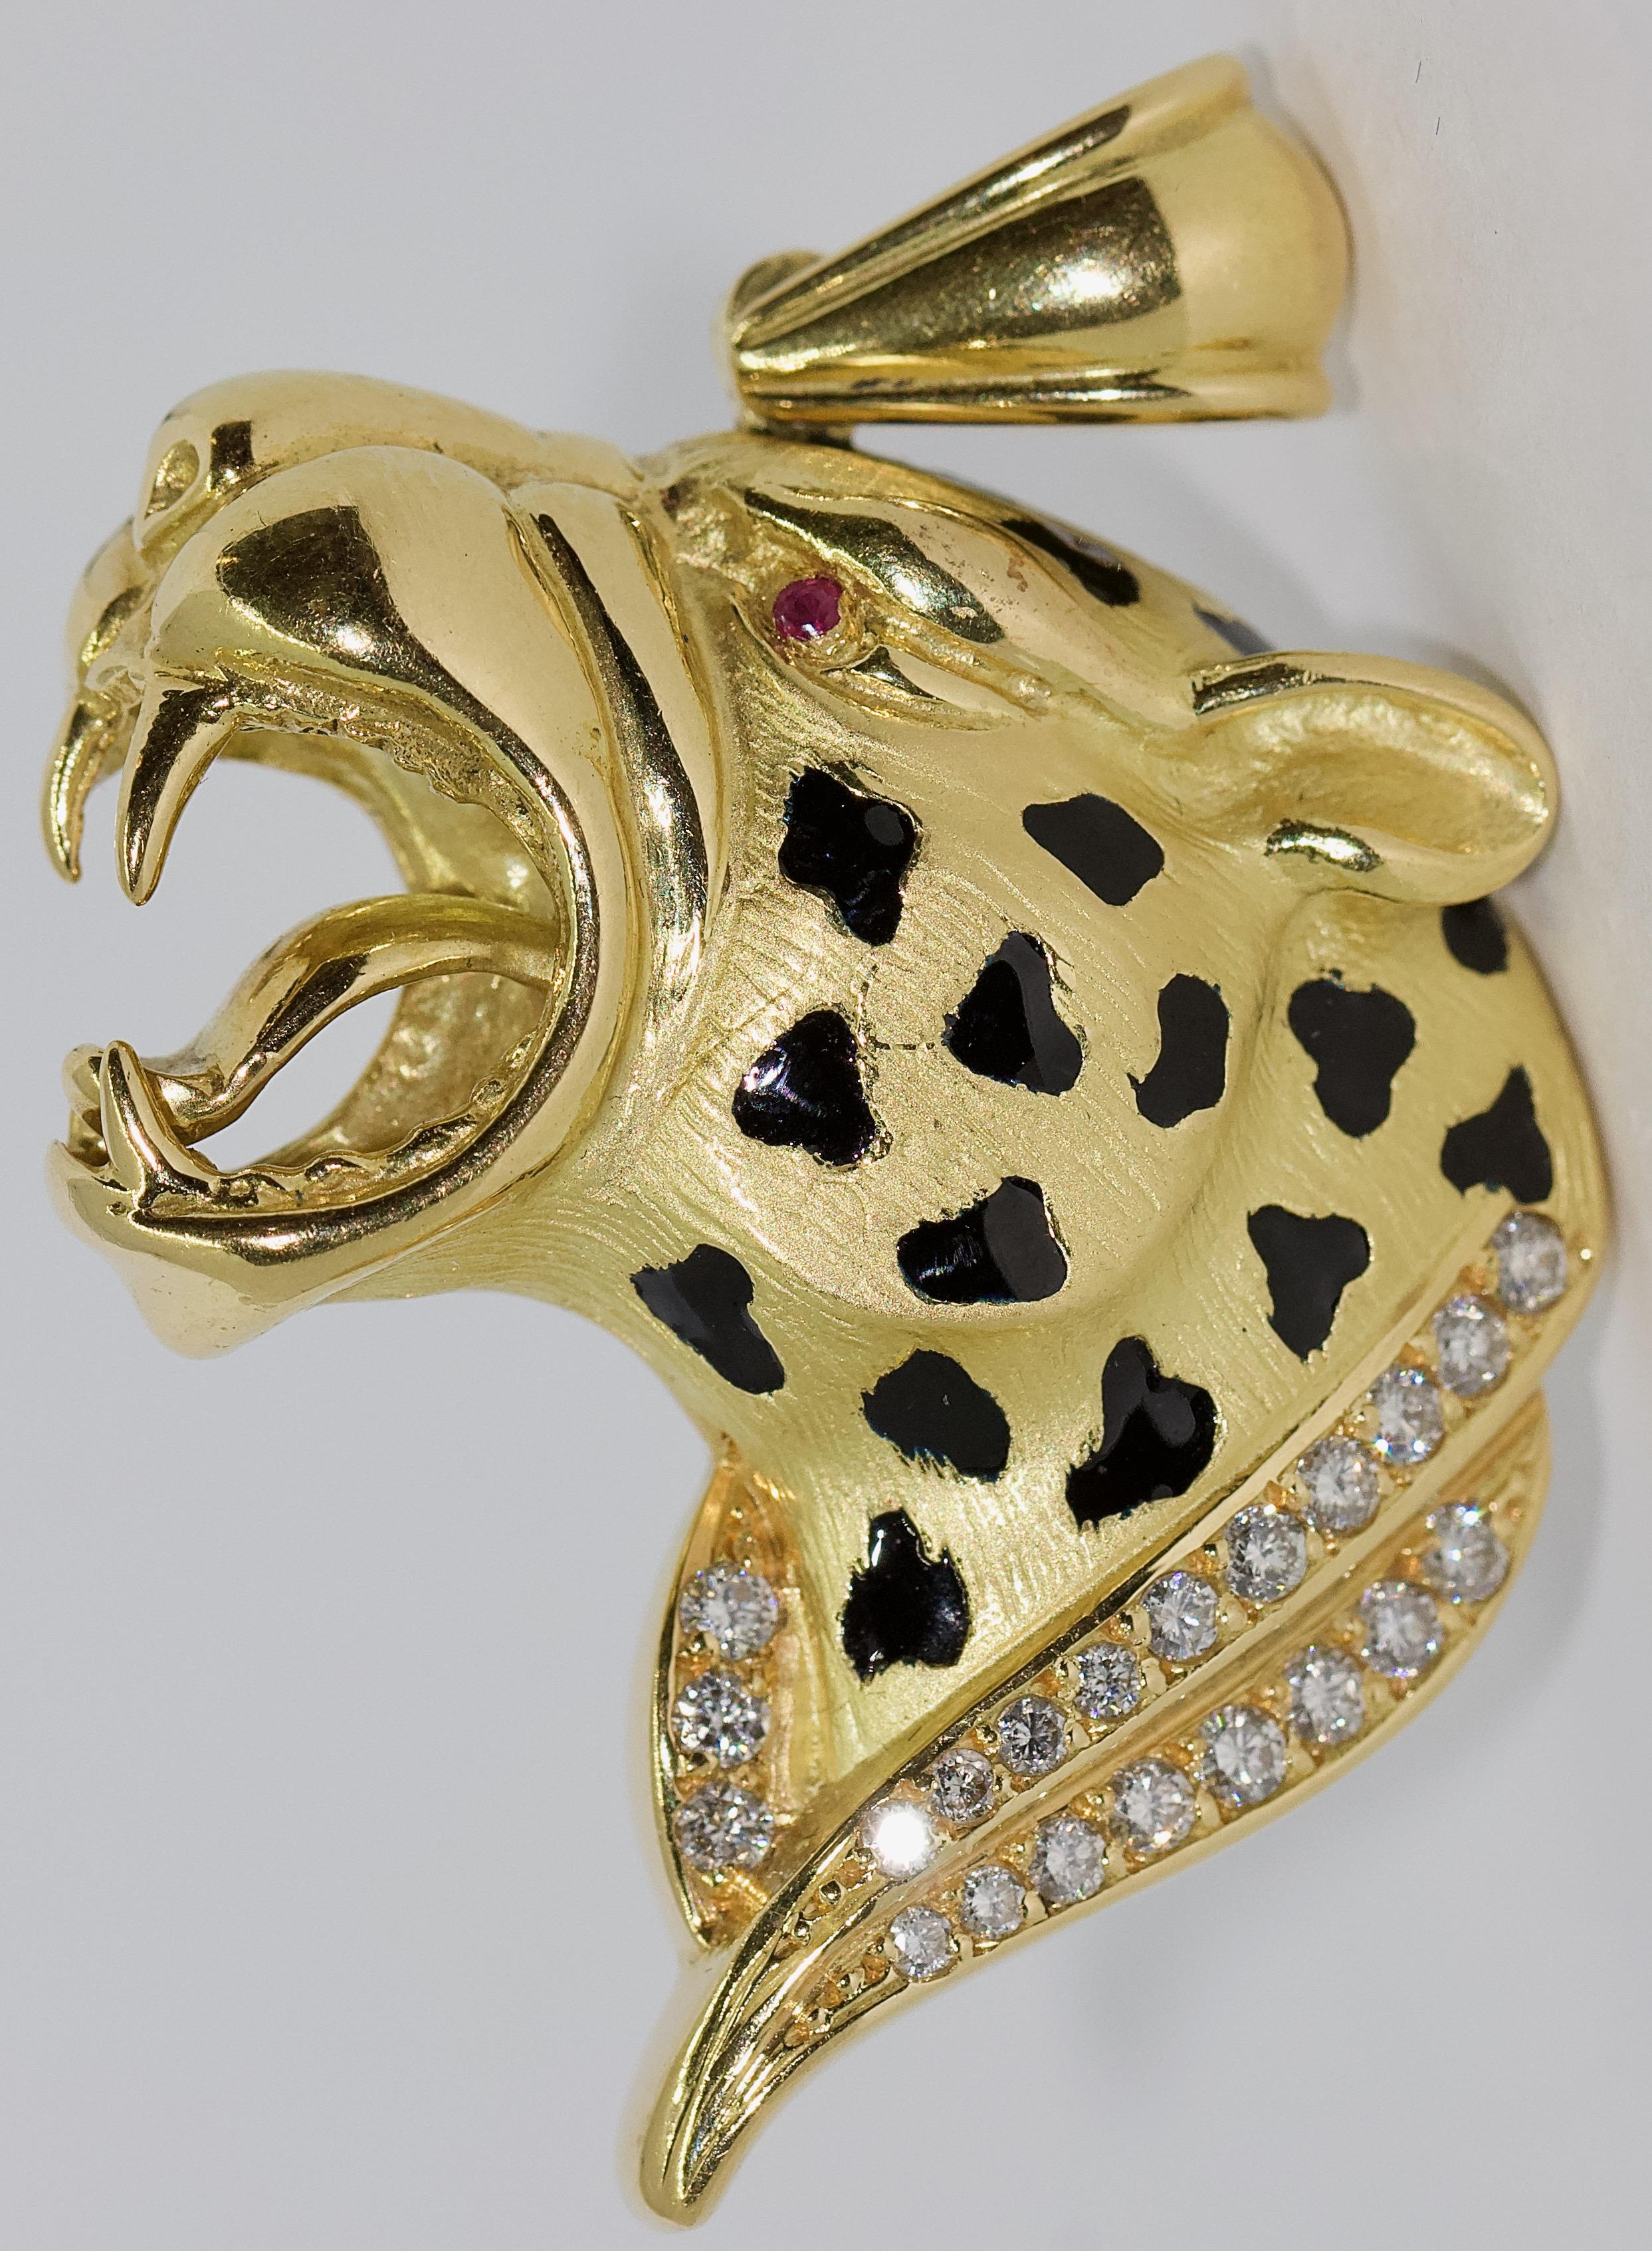 Magnificent leopard, cheetah pendant, 18 Karat yellow gold with enamel, white diamonds and small ruby.

Diamonds in very good quality.

Dimensions without gold eyelet.

Including certificate of authenticity.